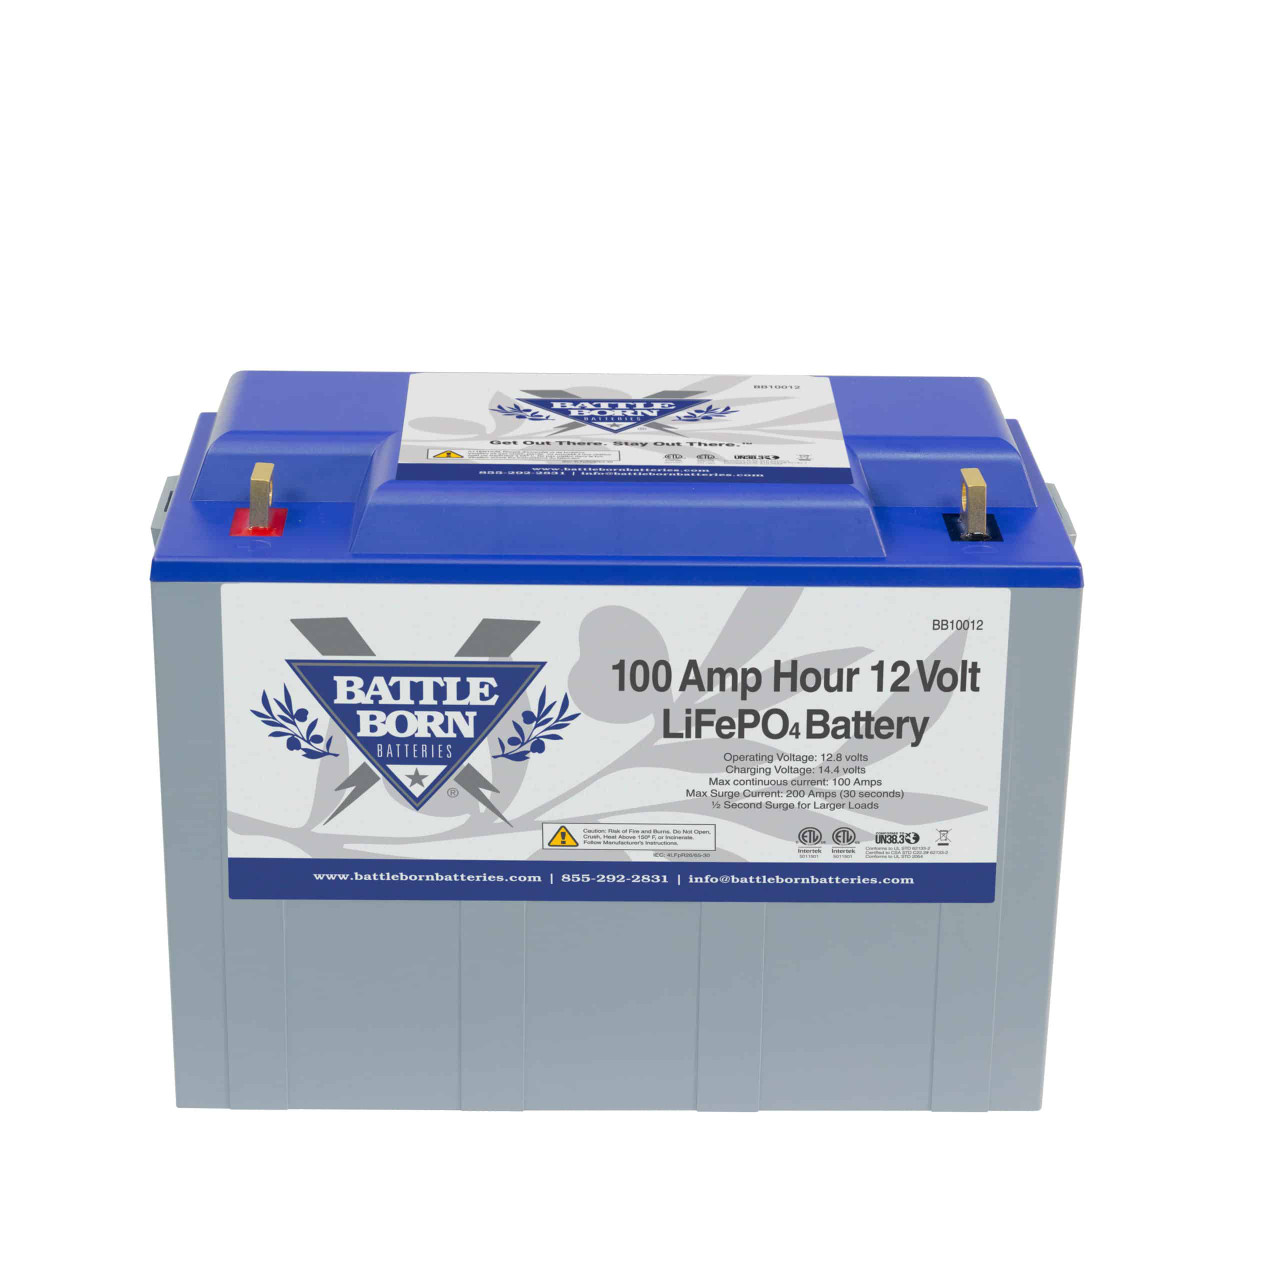 https://cdn11.bigcommerce.com/s-zgh44ntd7q/images/stencil/1280x1280/products/325/1495/Copy_of_Battle_Born_12V_100A_LiFePO4_Deep_Cycle_Battery_2__49990.1666071464.jpg?c=1